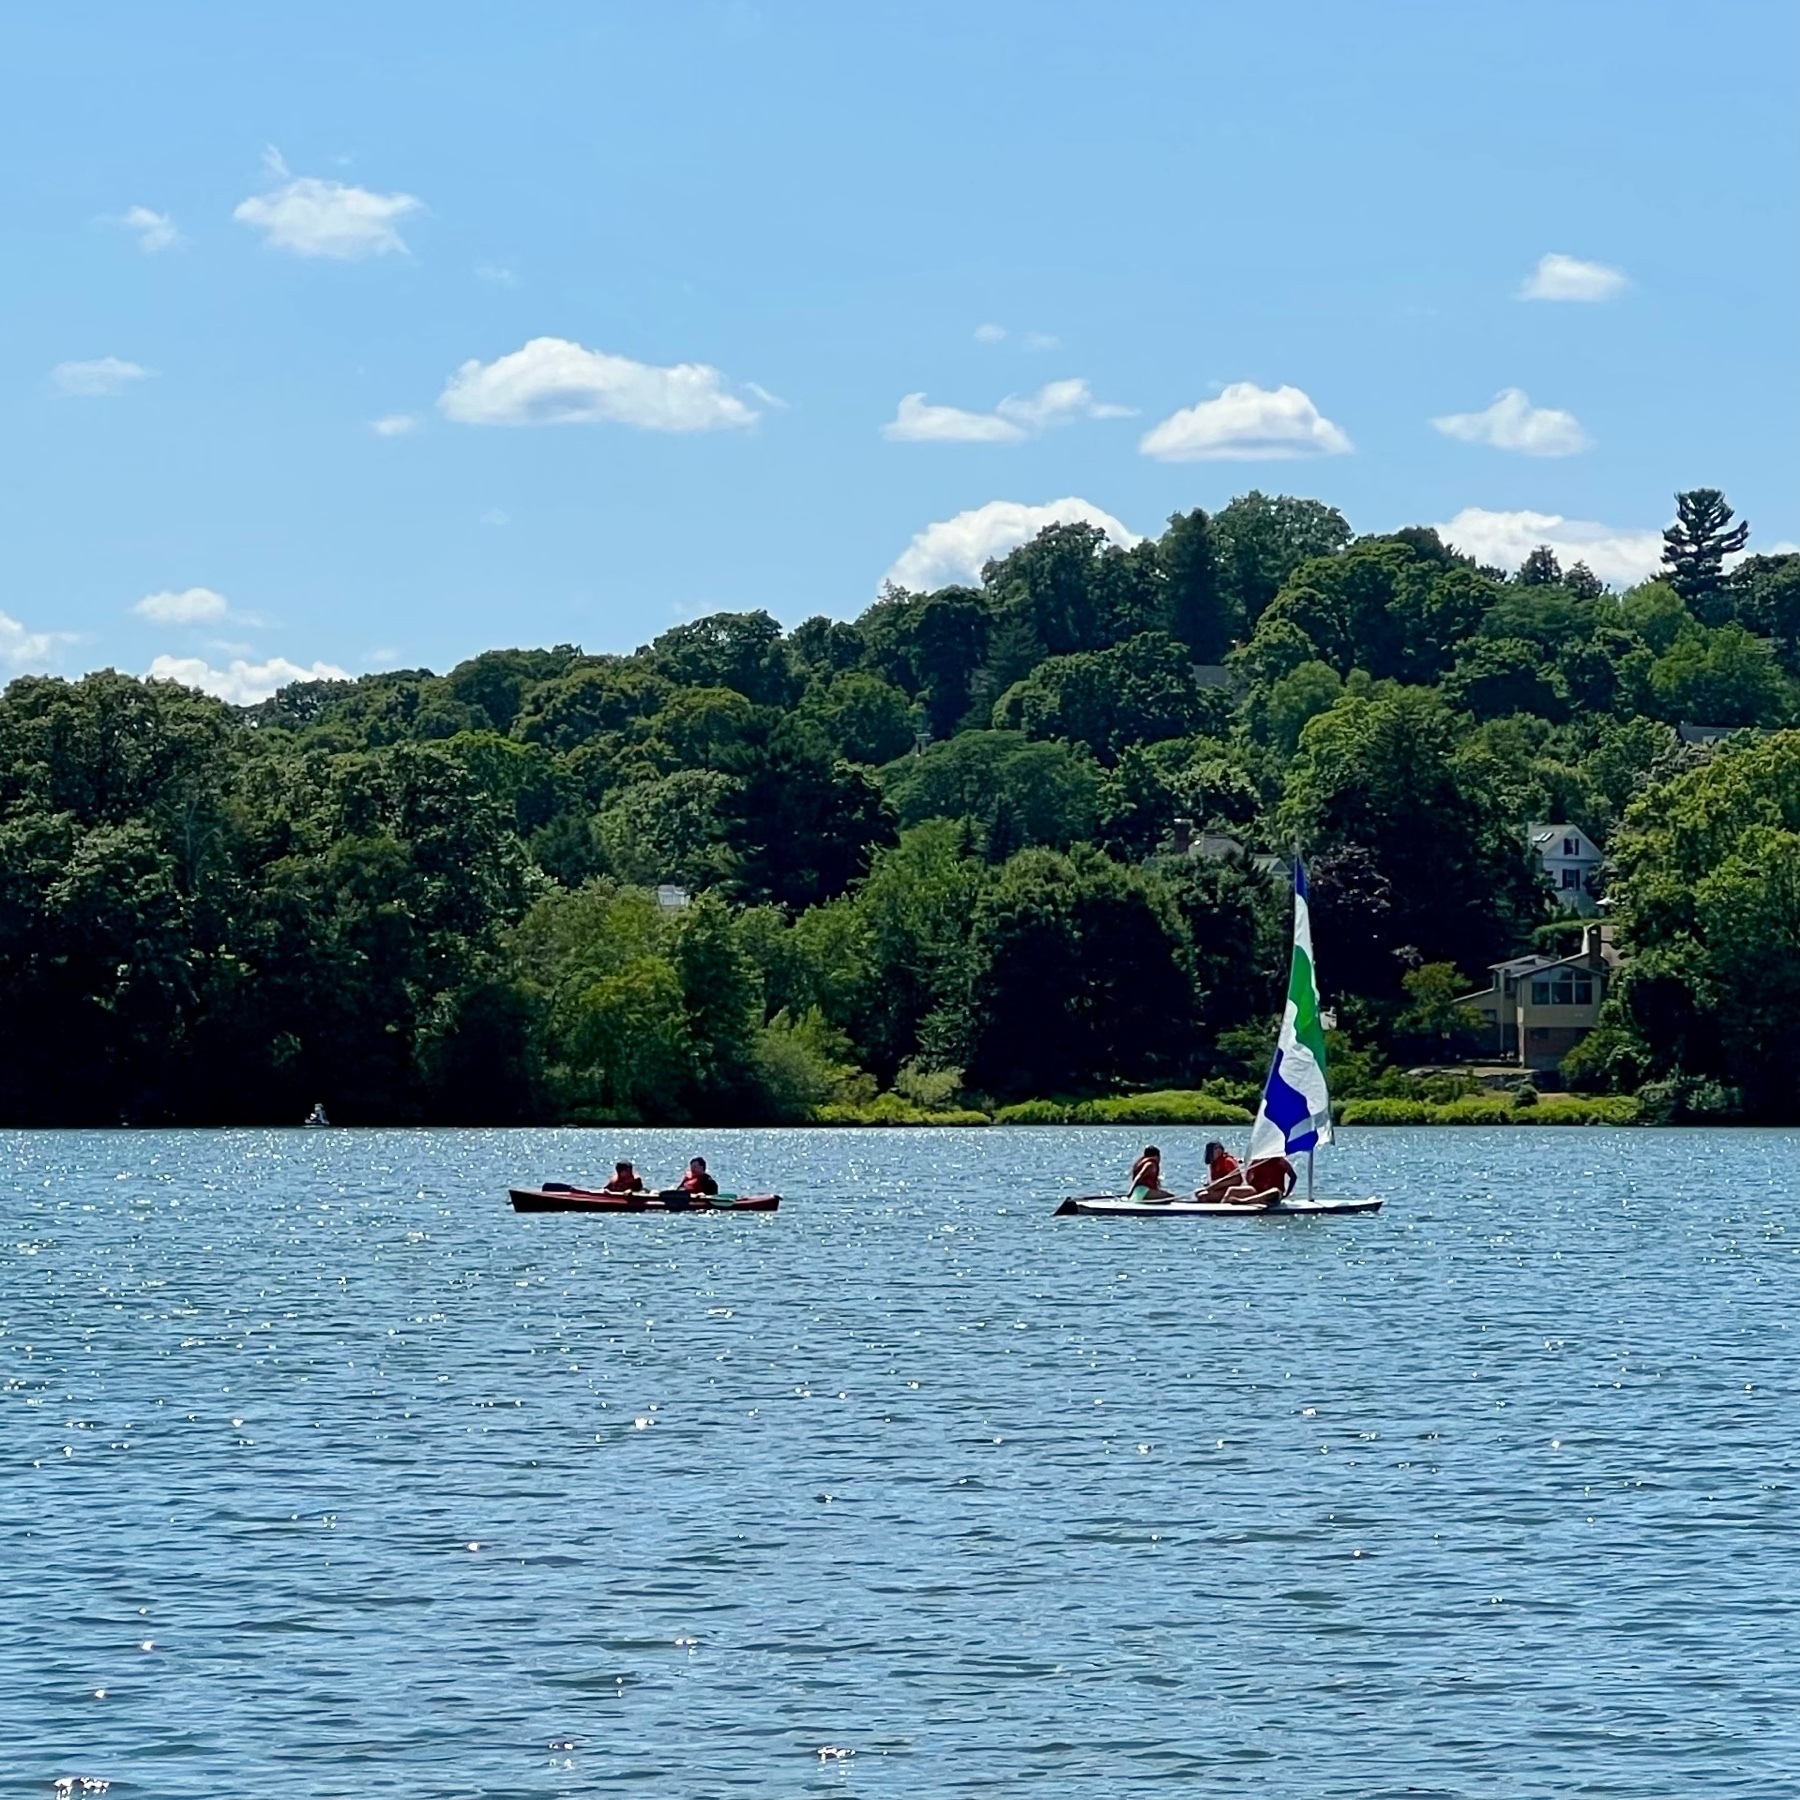 summer day on a lake with sailboat and kayak against trees and blue sky